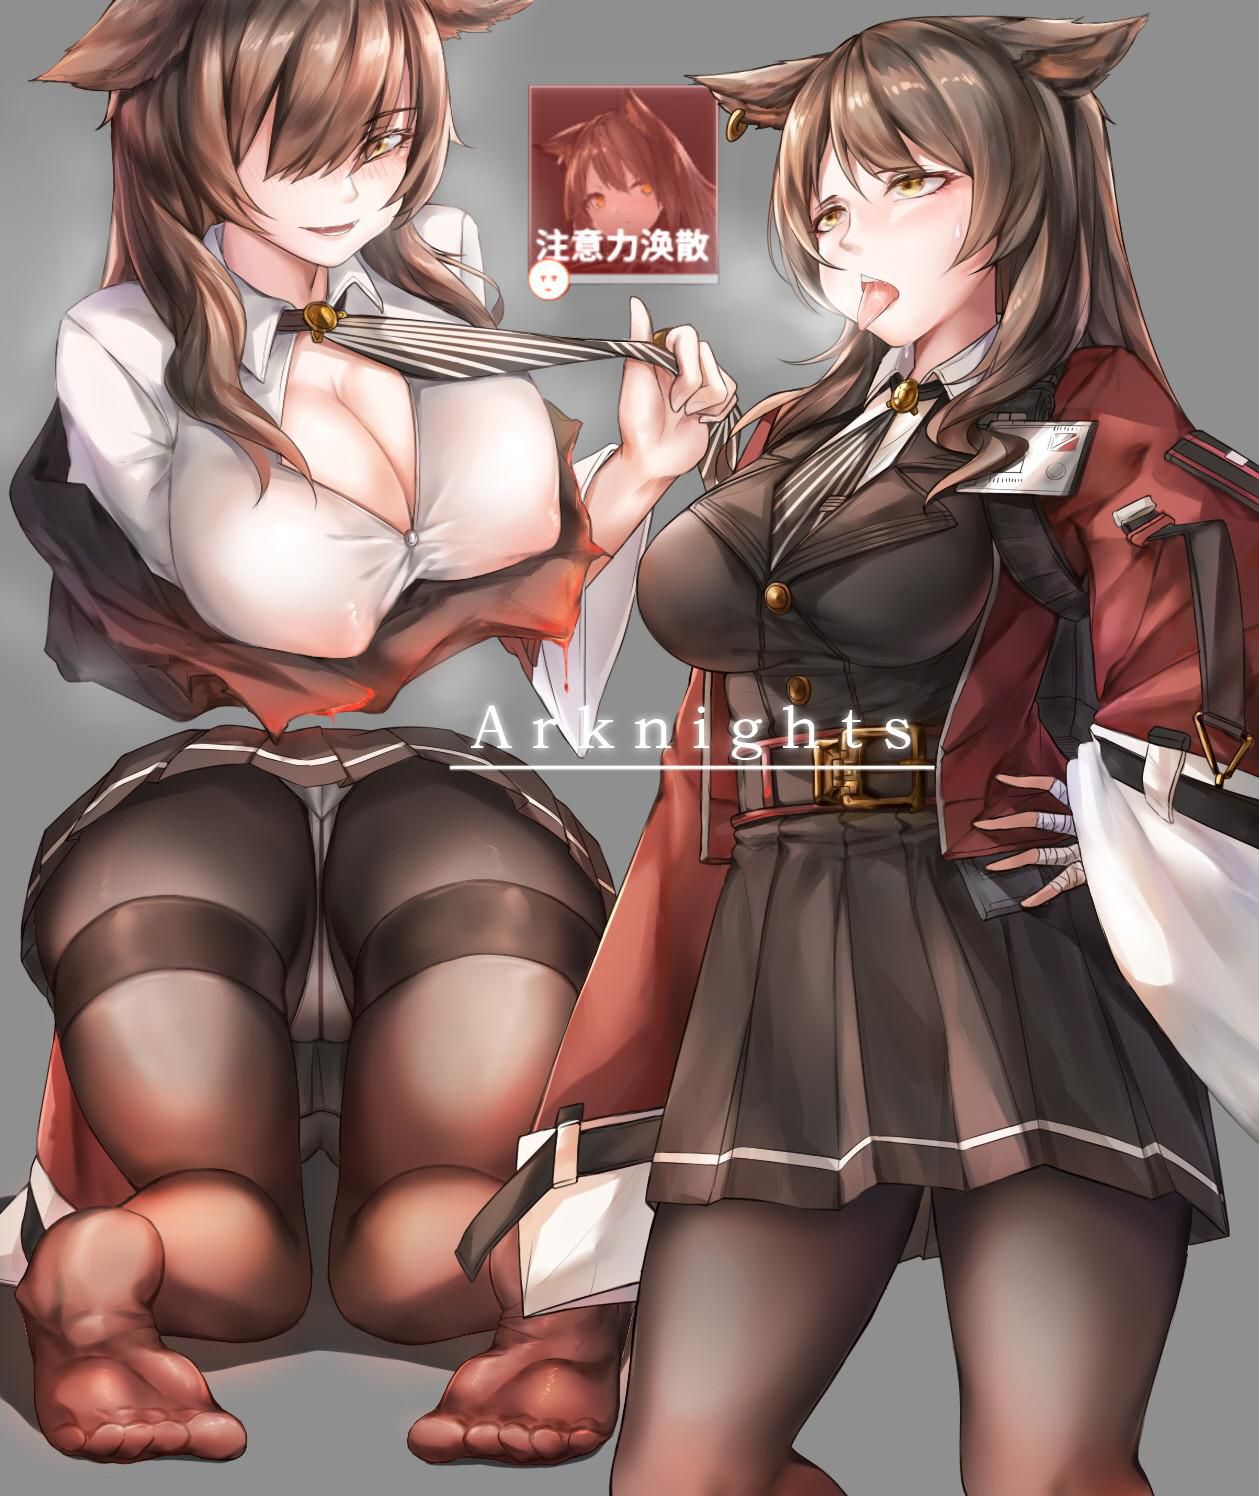 Get a and obscene image of Ark Knights (Ark tomorrow)! 1